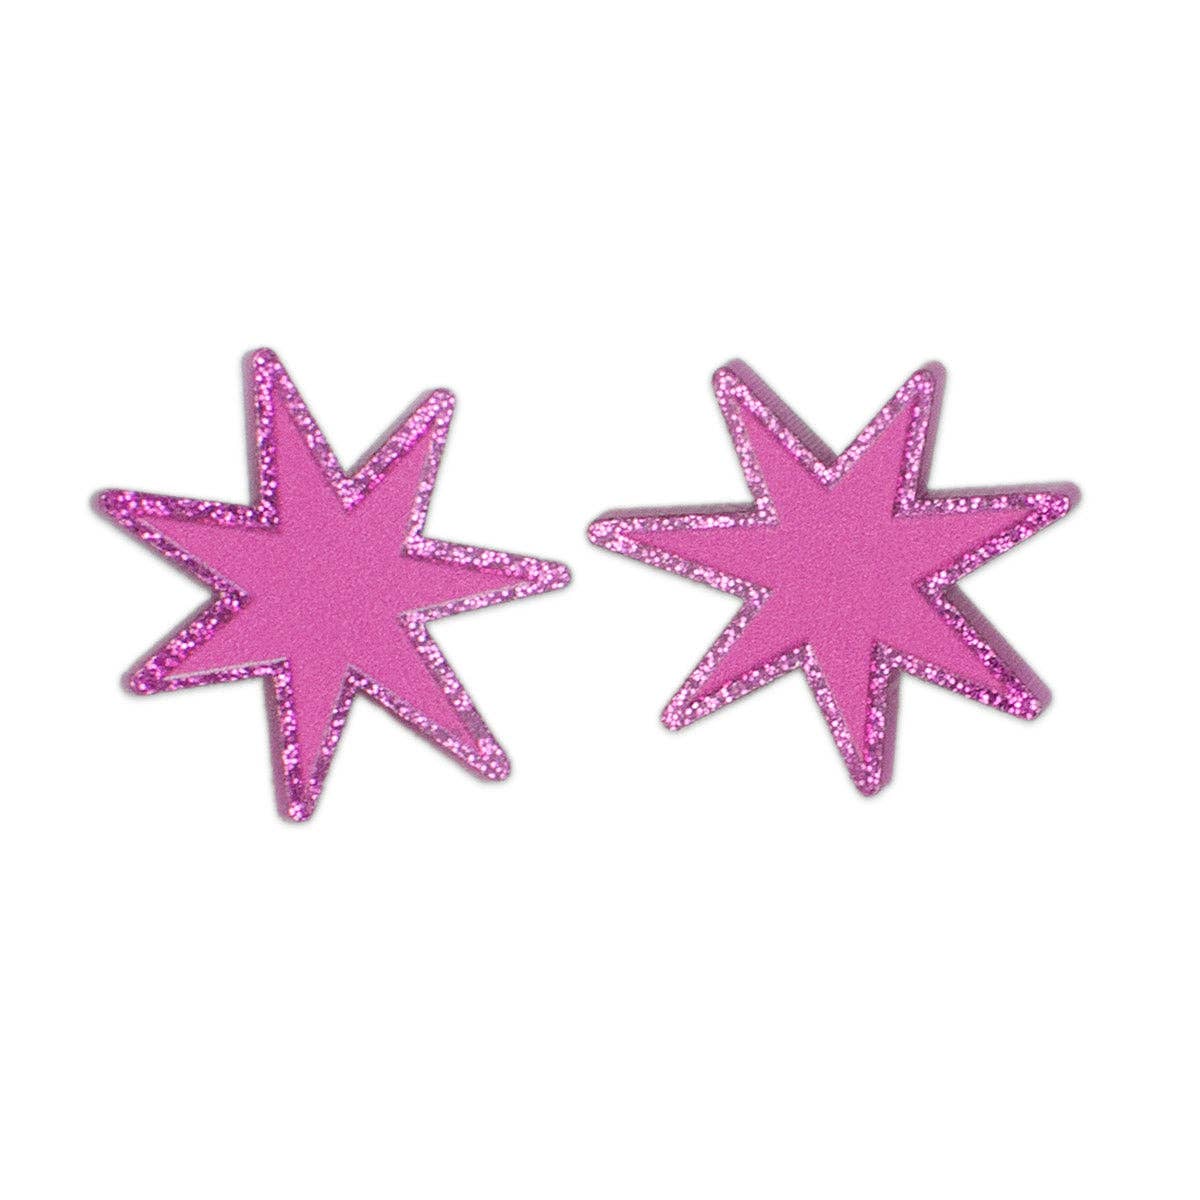 magenta laser-cut acrylic starburst post earrings with a matching glitter border. Shown from front